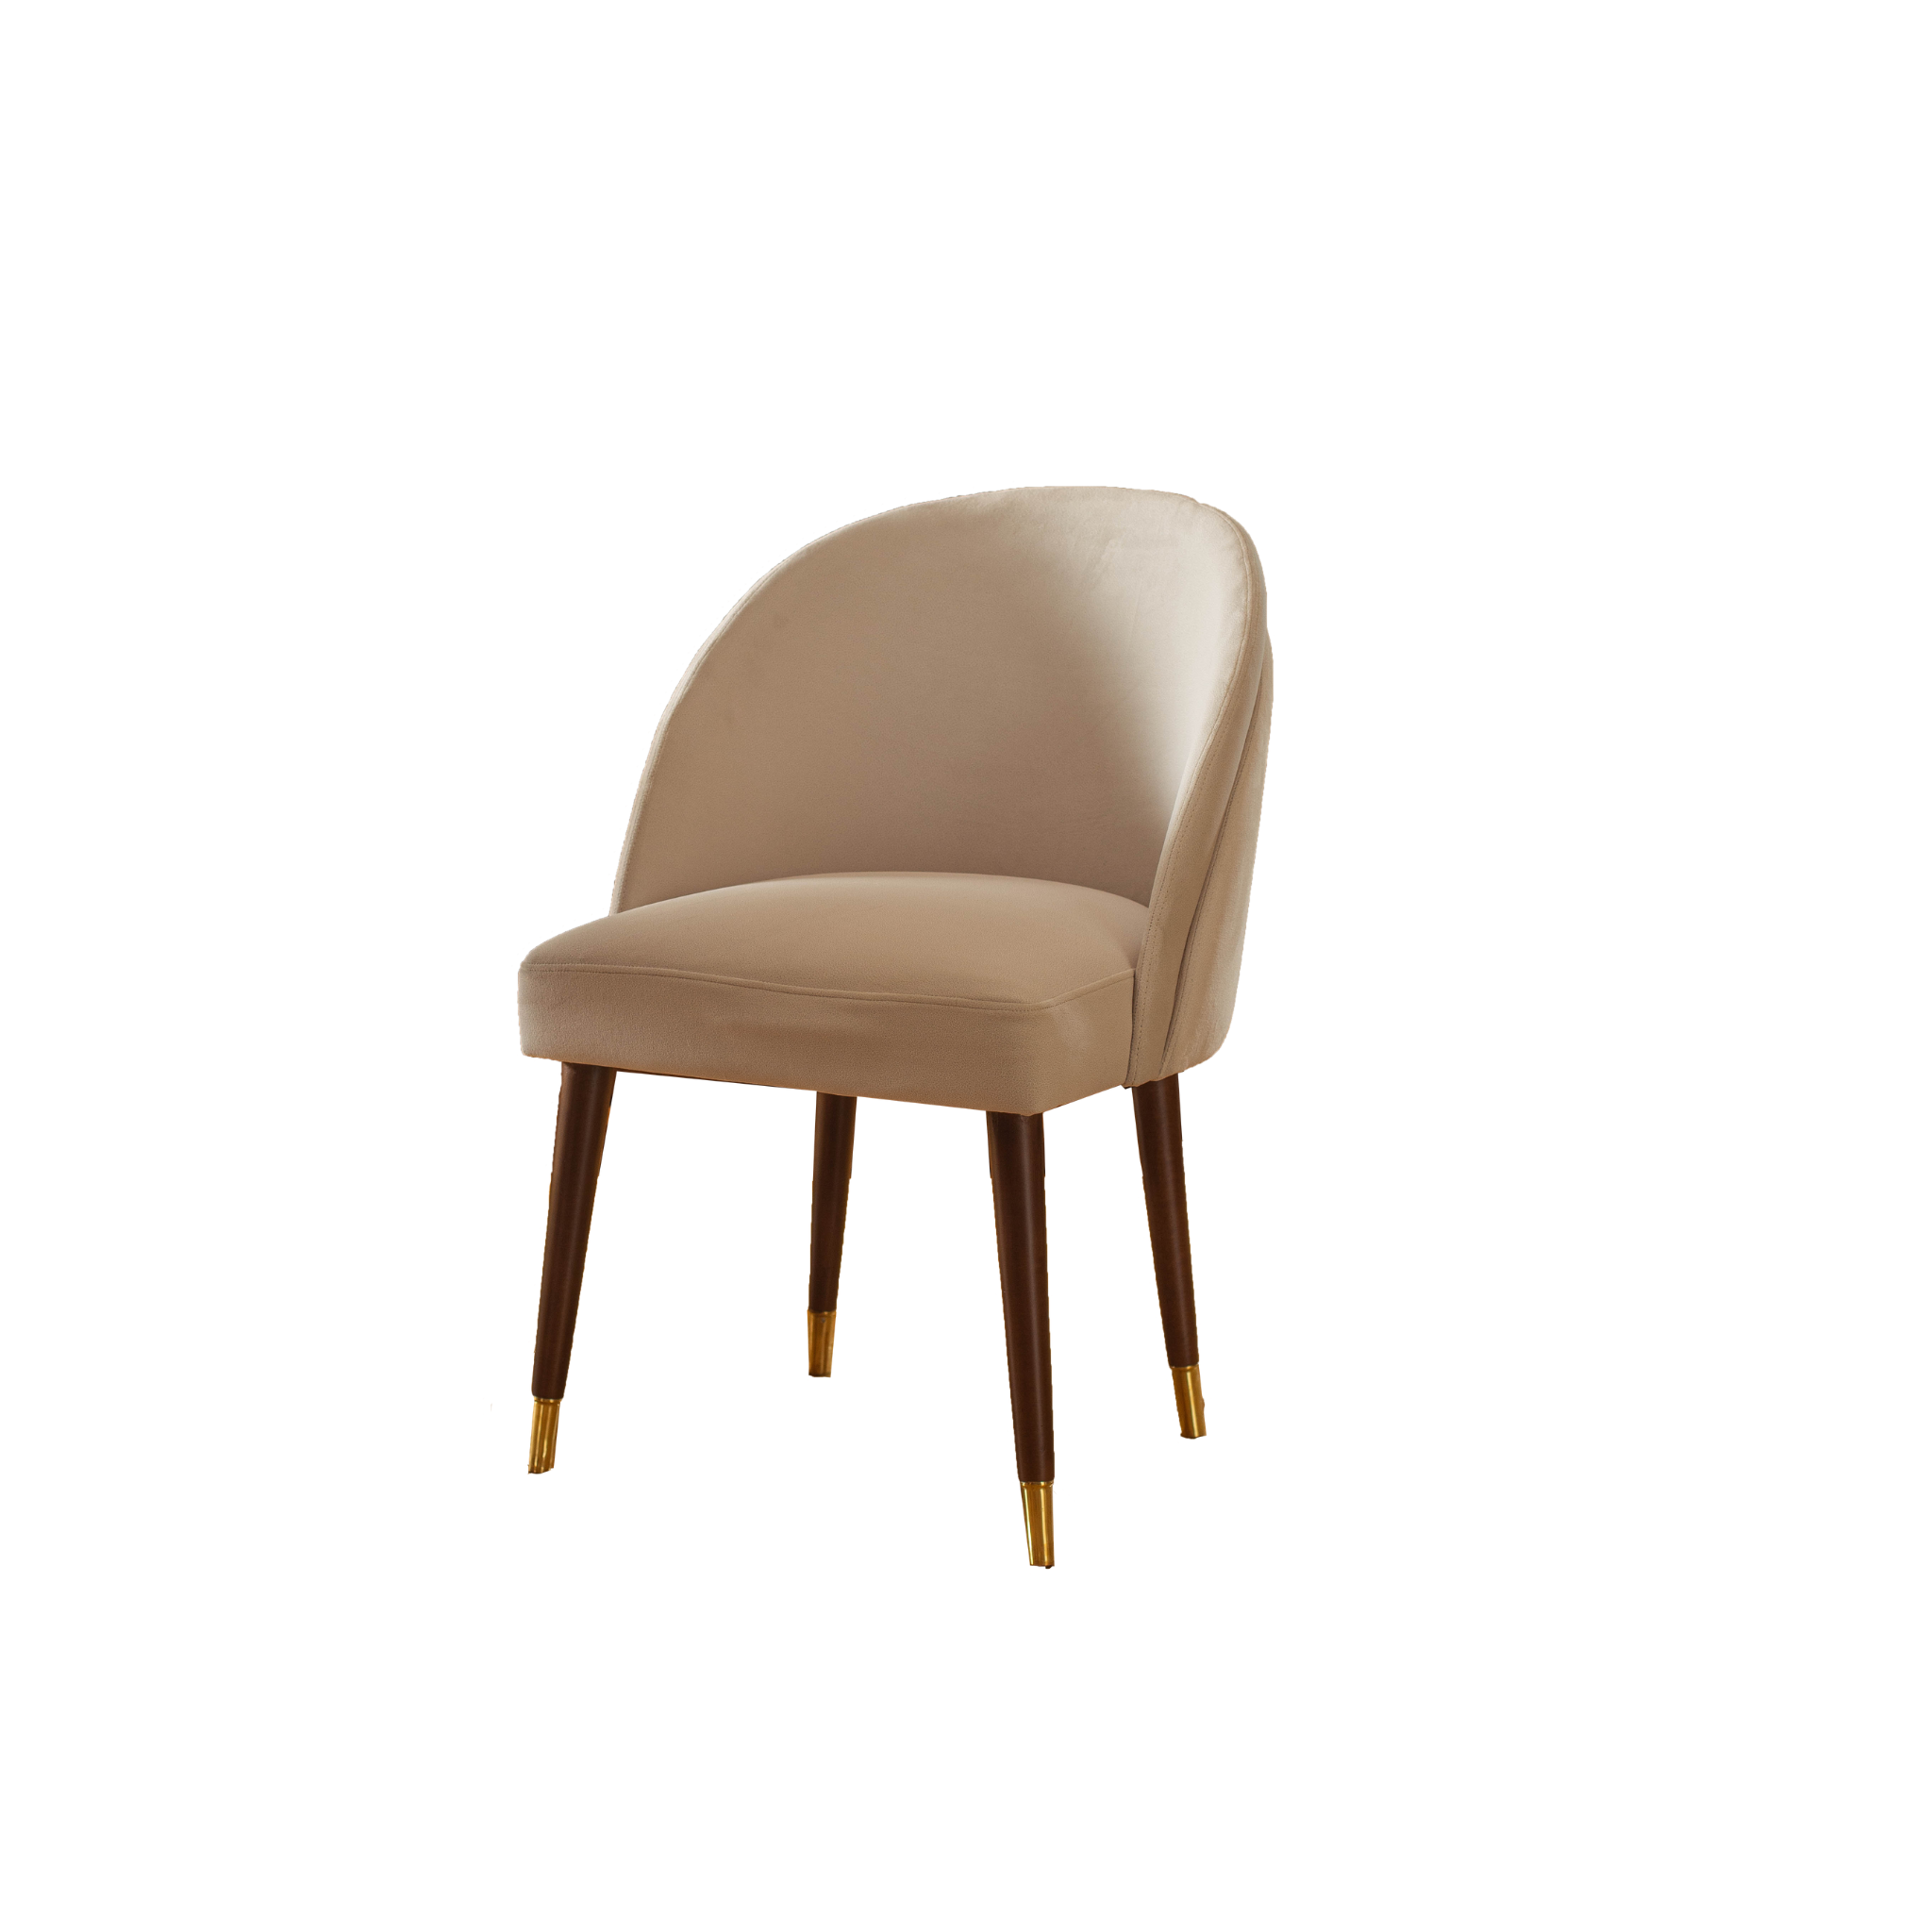 Layer Dinning Chair